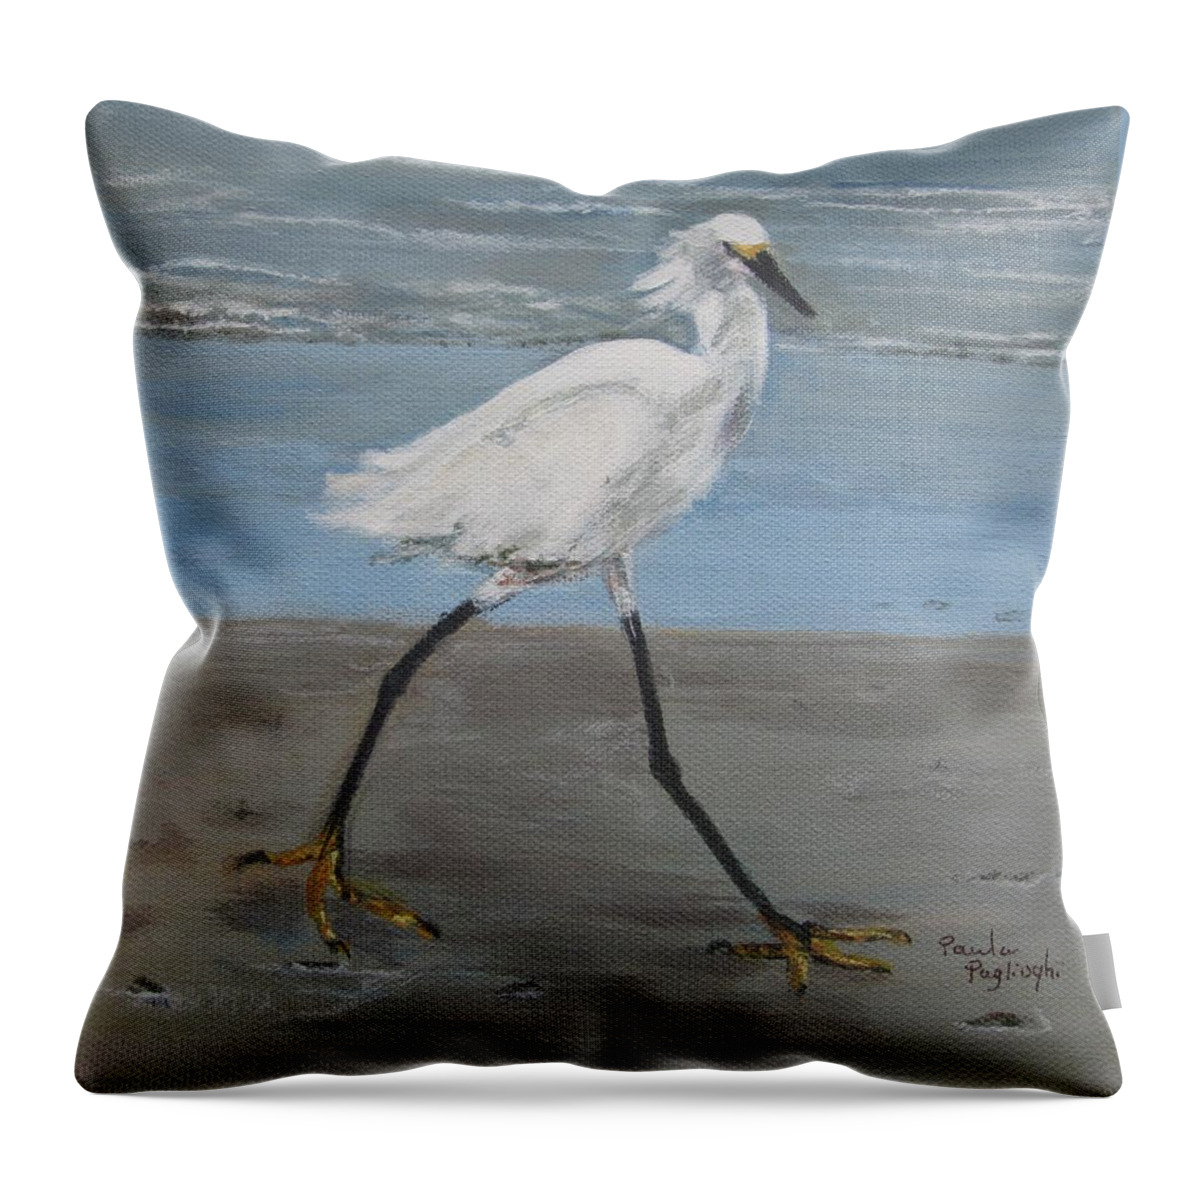 Painting Throw Pillow featuring the painting Prancer by Paula Pagliughi